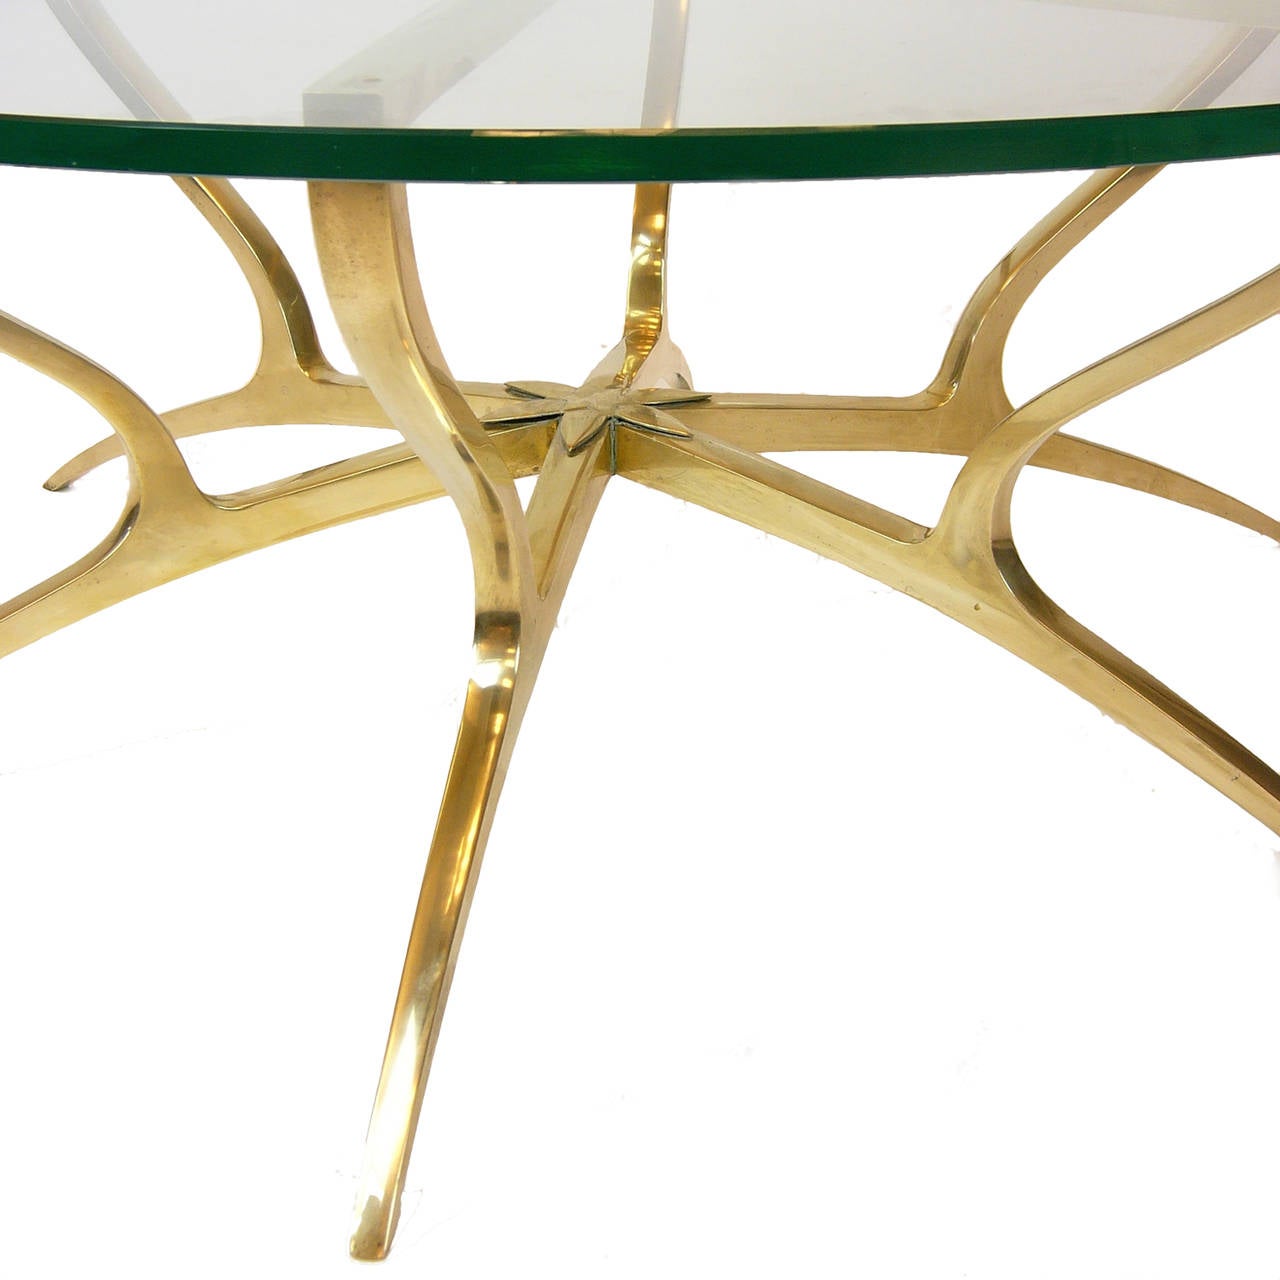 Polished Heavy Solid Brass with Glass Italian Style Spider Legged Coffee Table